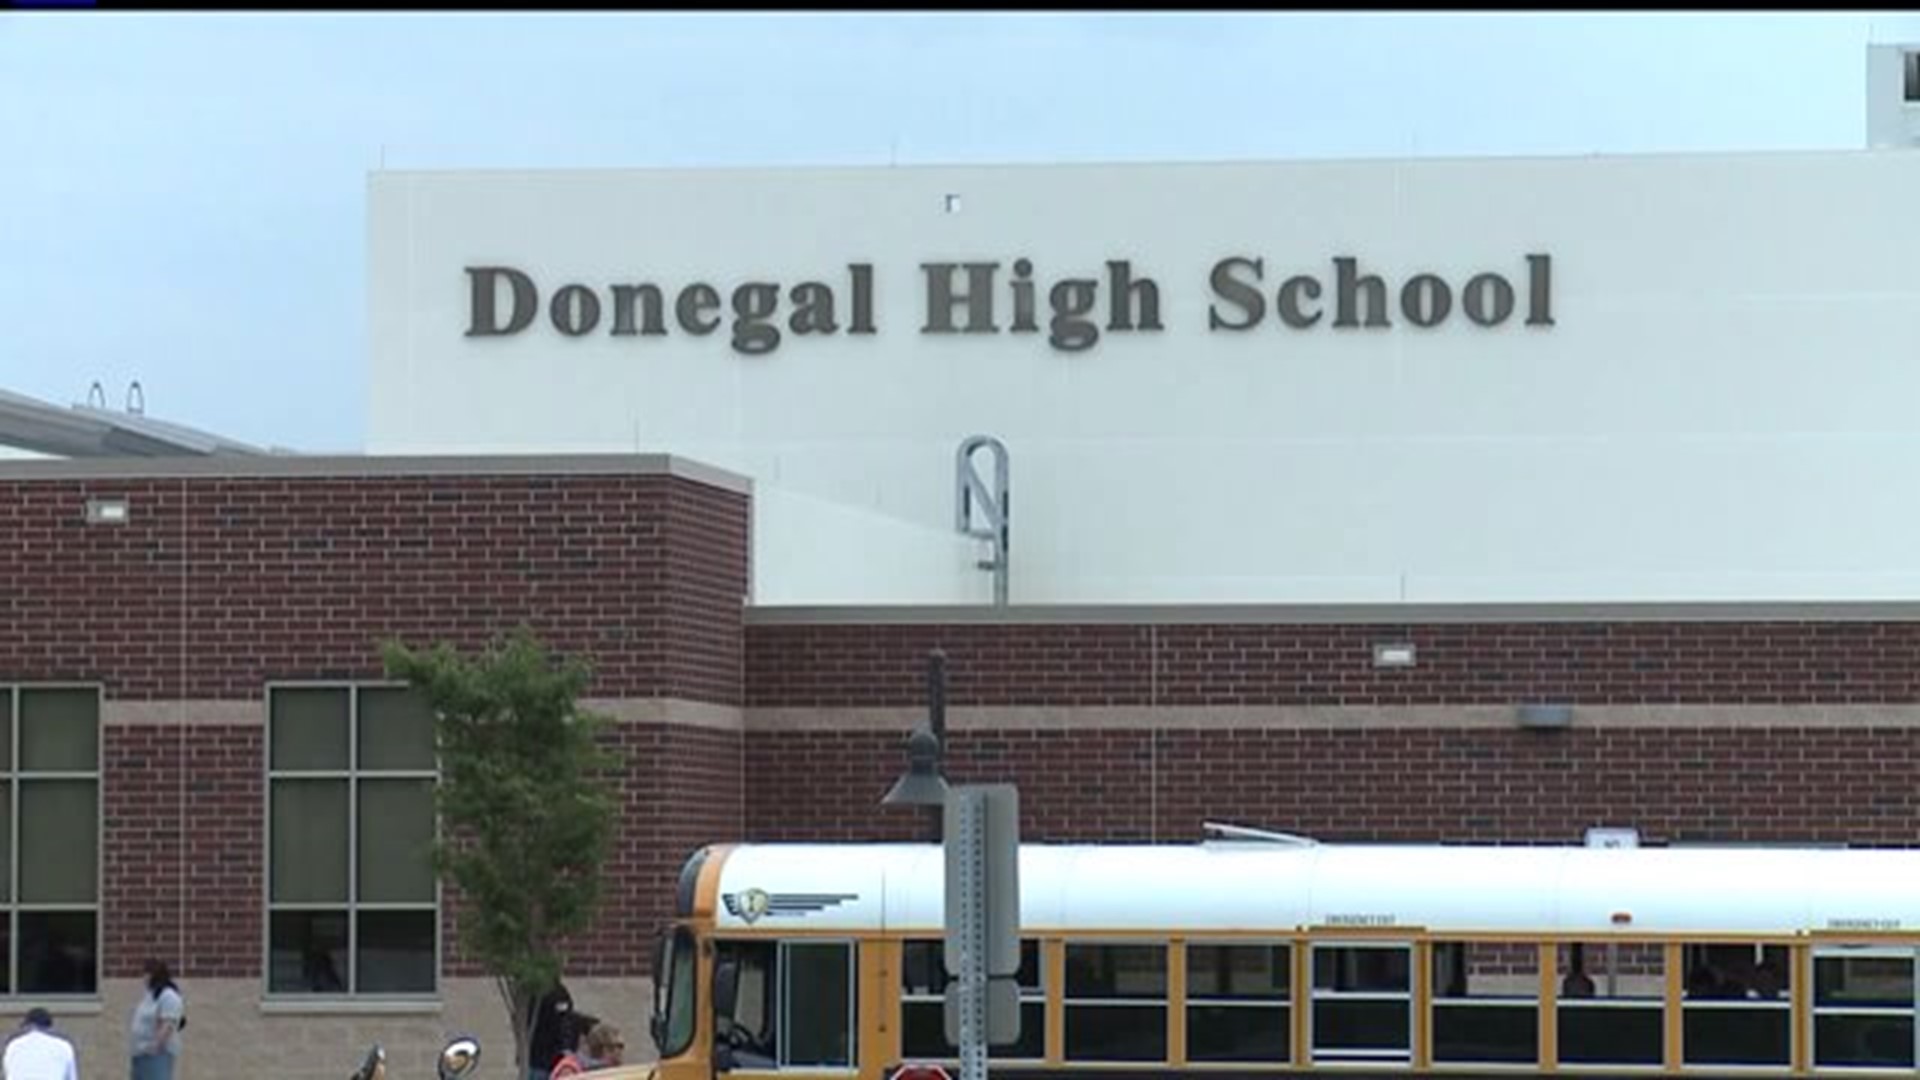 Police investigate threat at Donegal High School